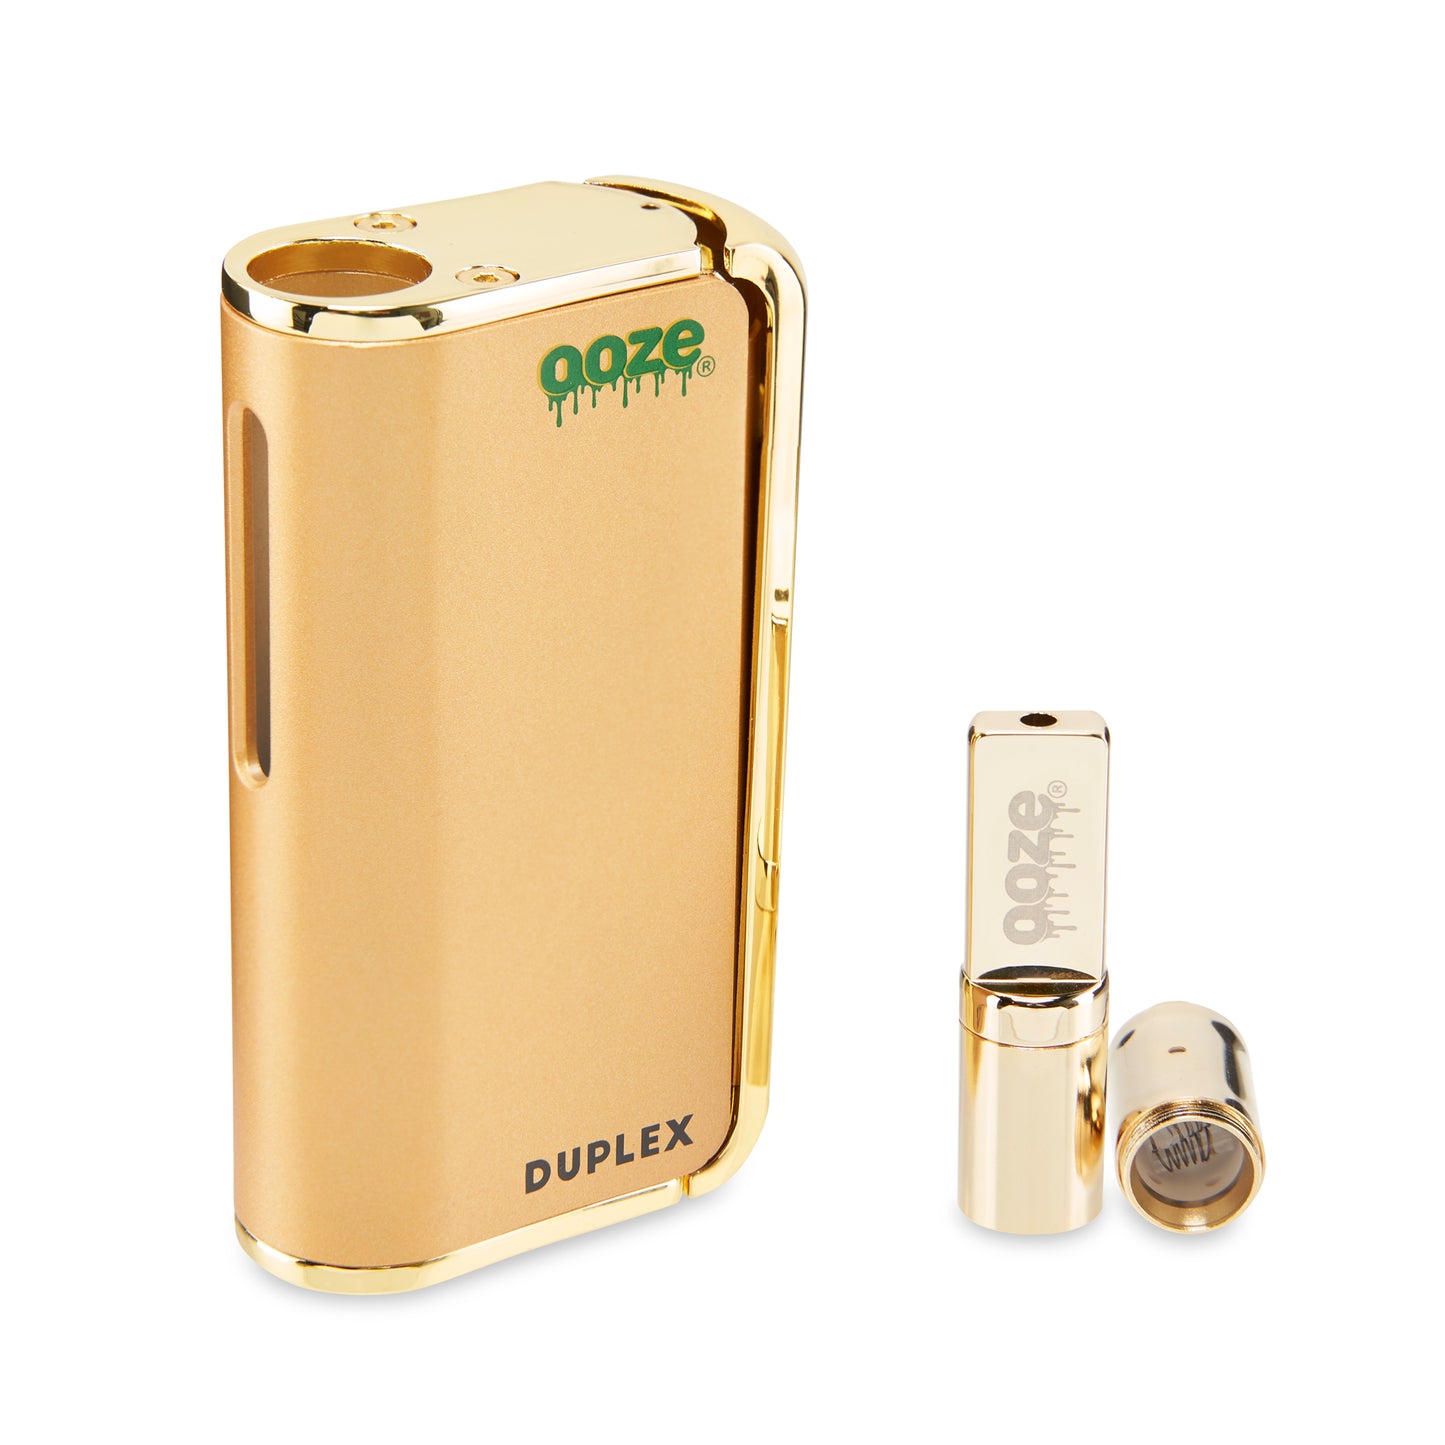 The Lucky Gold Ooze Duplex Pro Vaporizer is shown on an angle next to the wax atomizer that is unscrewed to show the dual quartz coil.